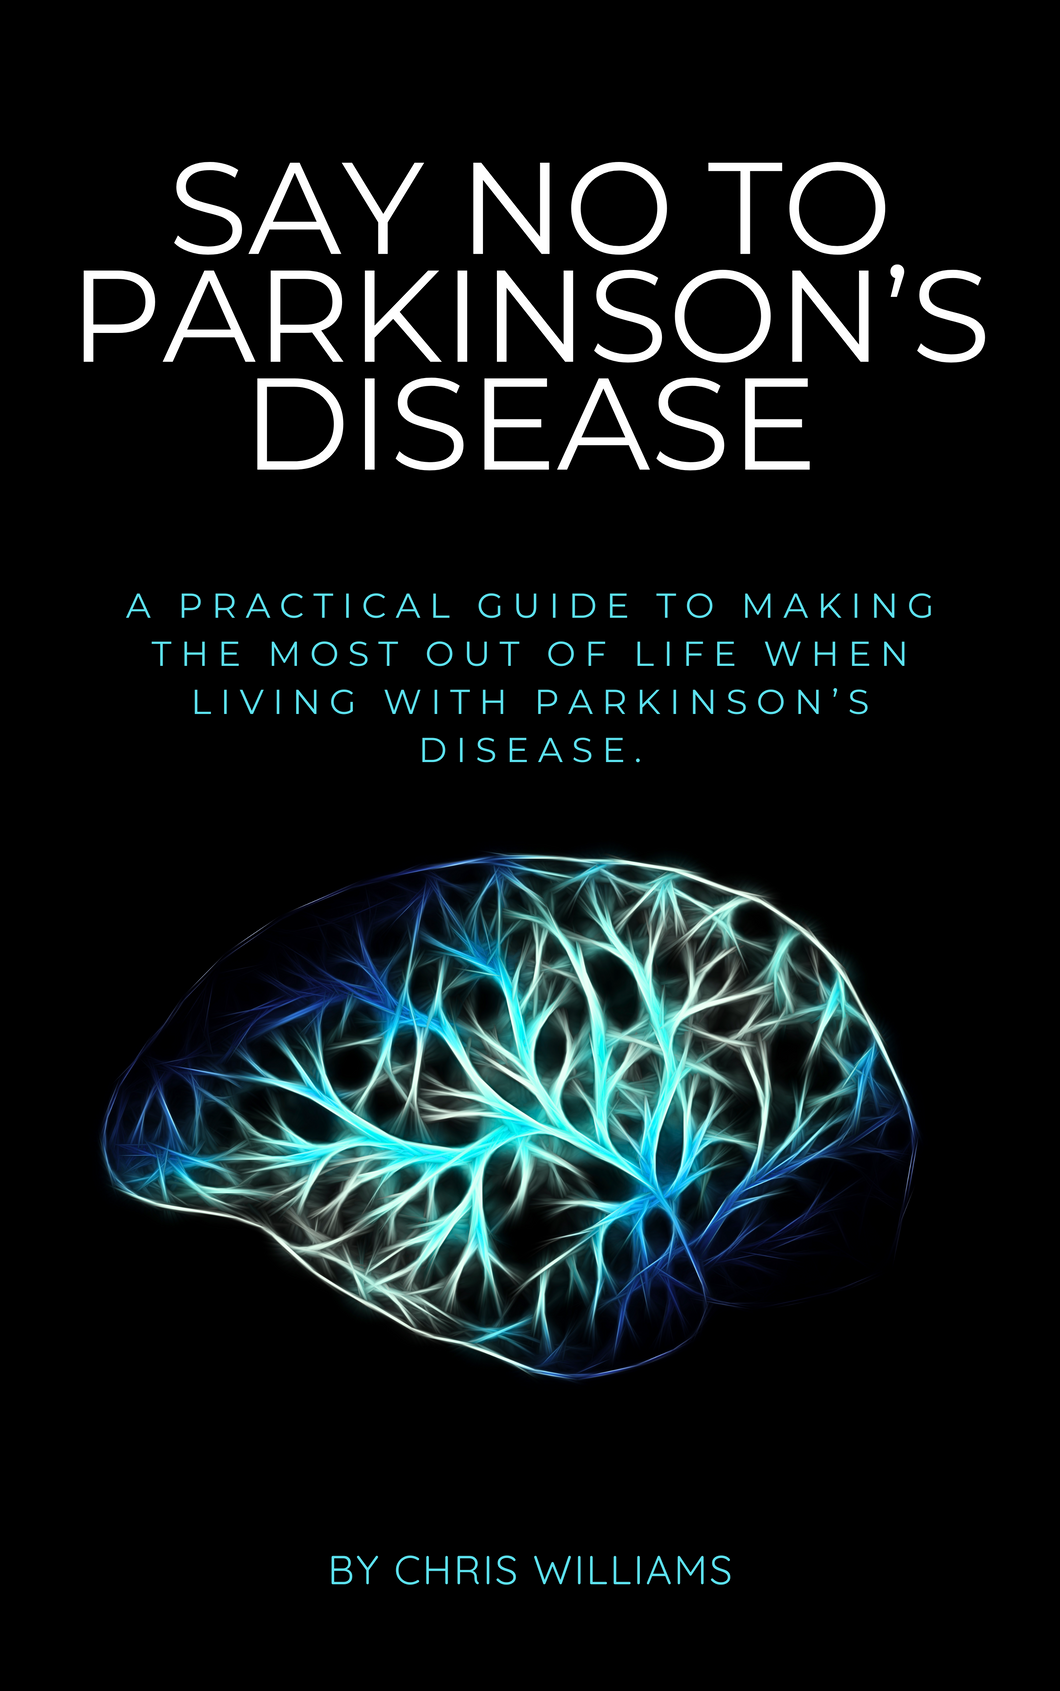 Front cover of Say No To Parkinson’s disease eBook – Author Chris Williams